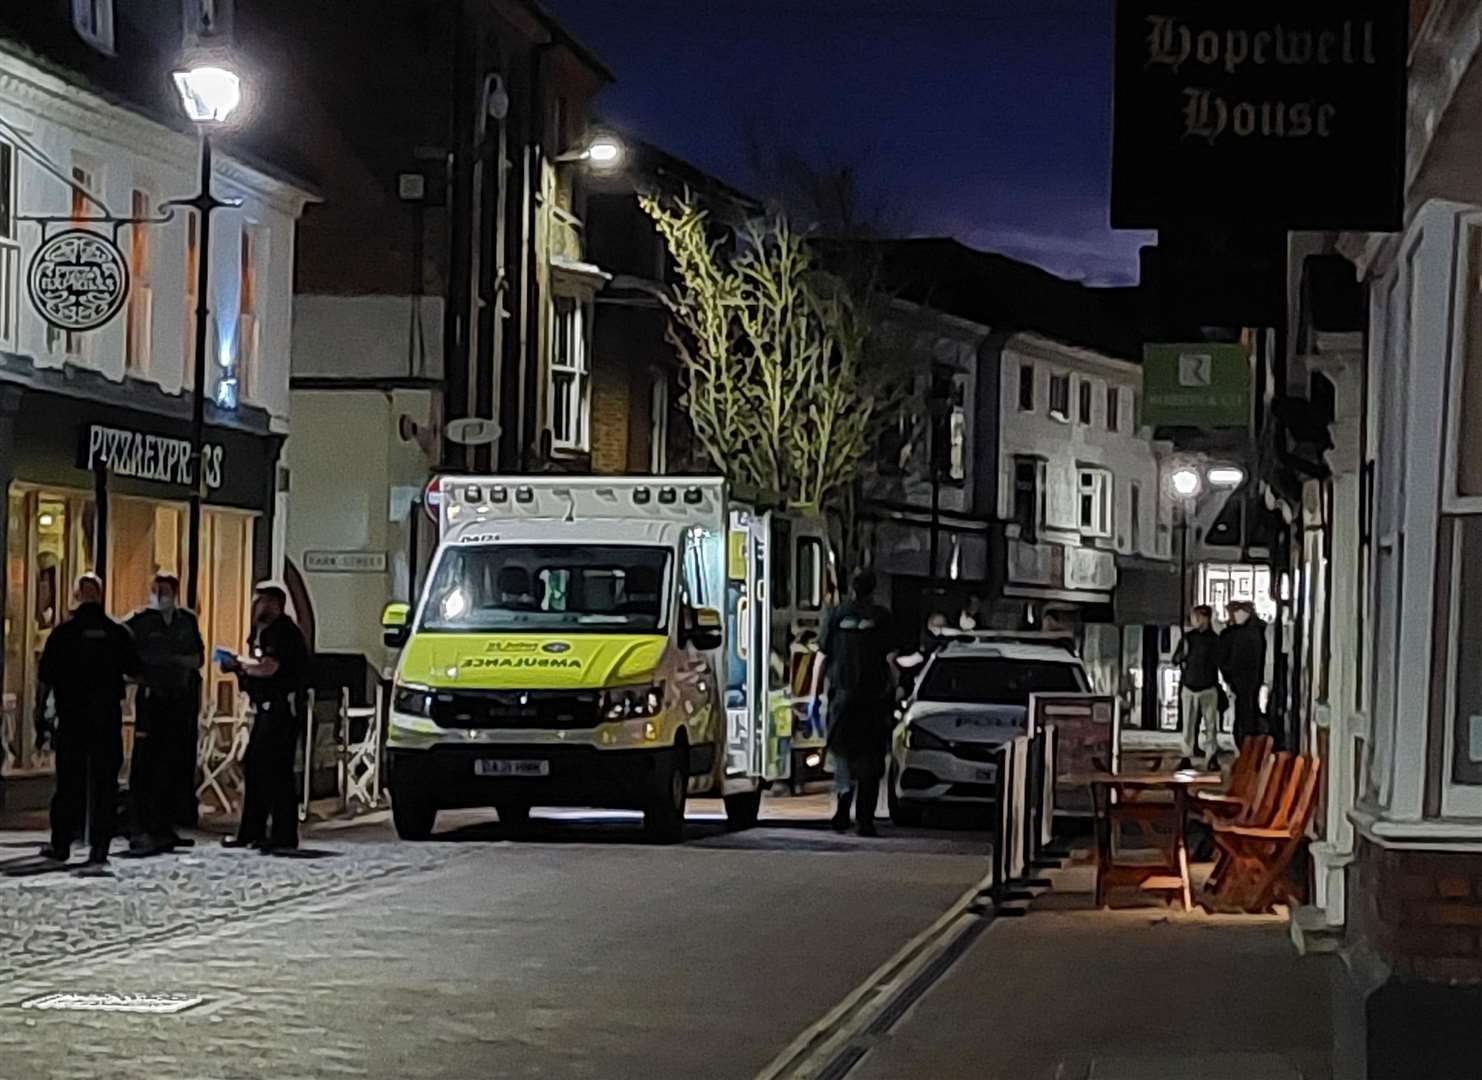 Police and paramedics were called to North Street just after 5pm